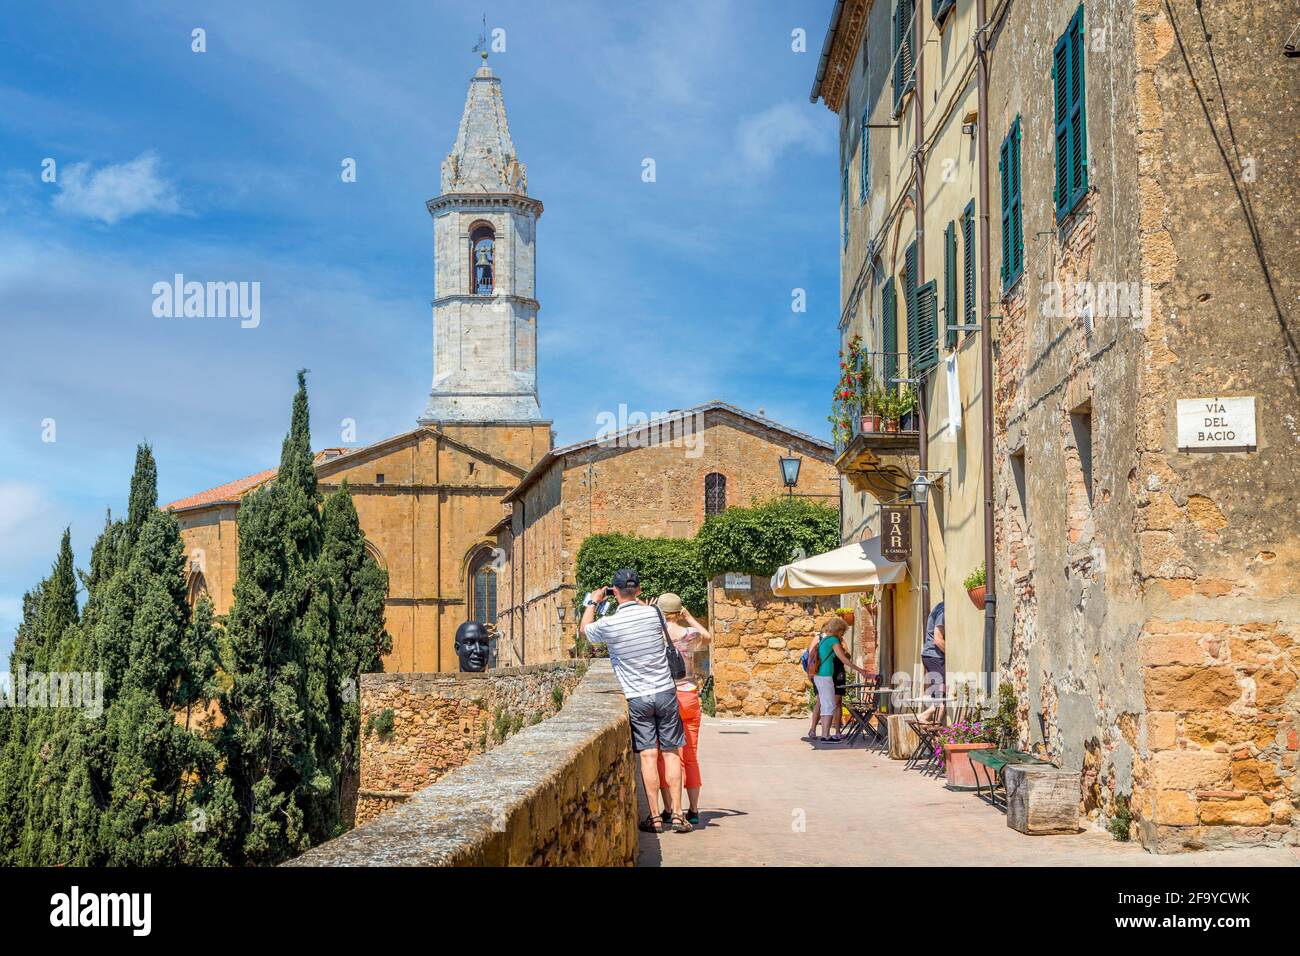 Pienza, Siena Province, Tuscany, Italy.  View from walk along city walls to the tower of Cattedrale di Santa Maria Assunta - the Cathedral of Holy Mar Stock Photo